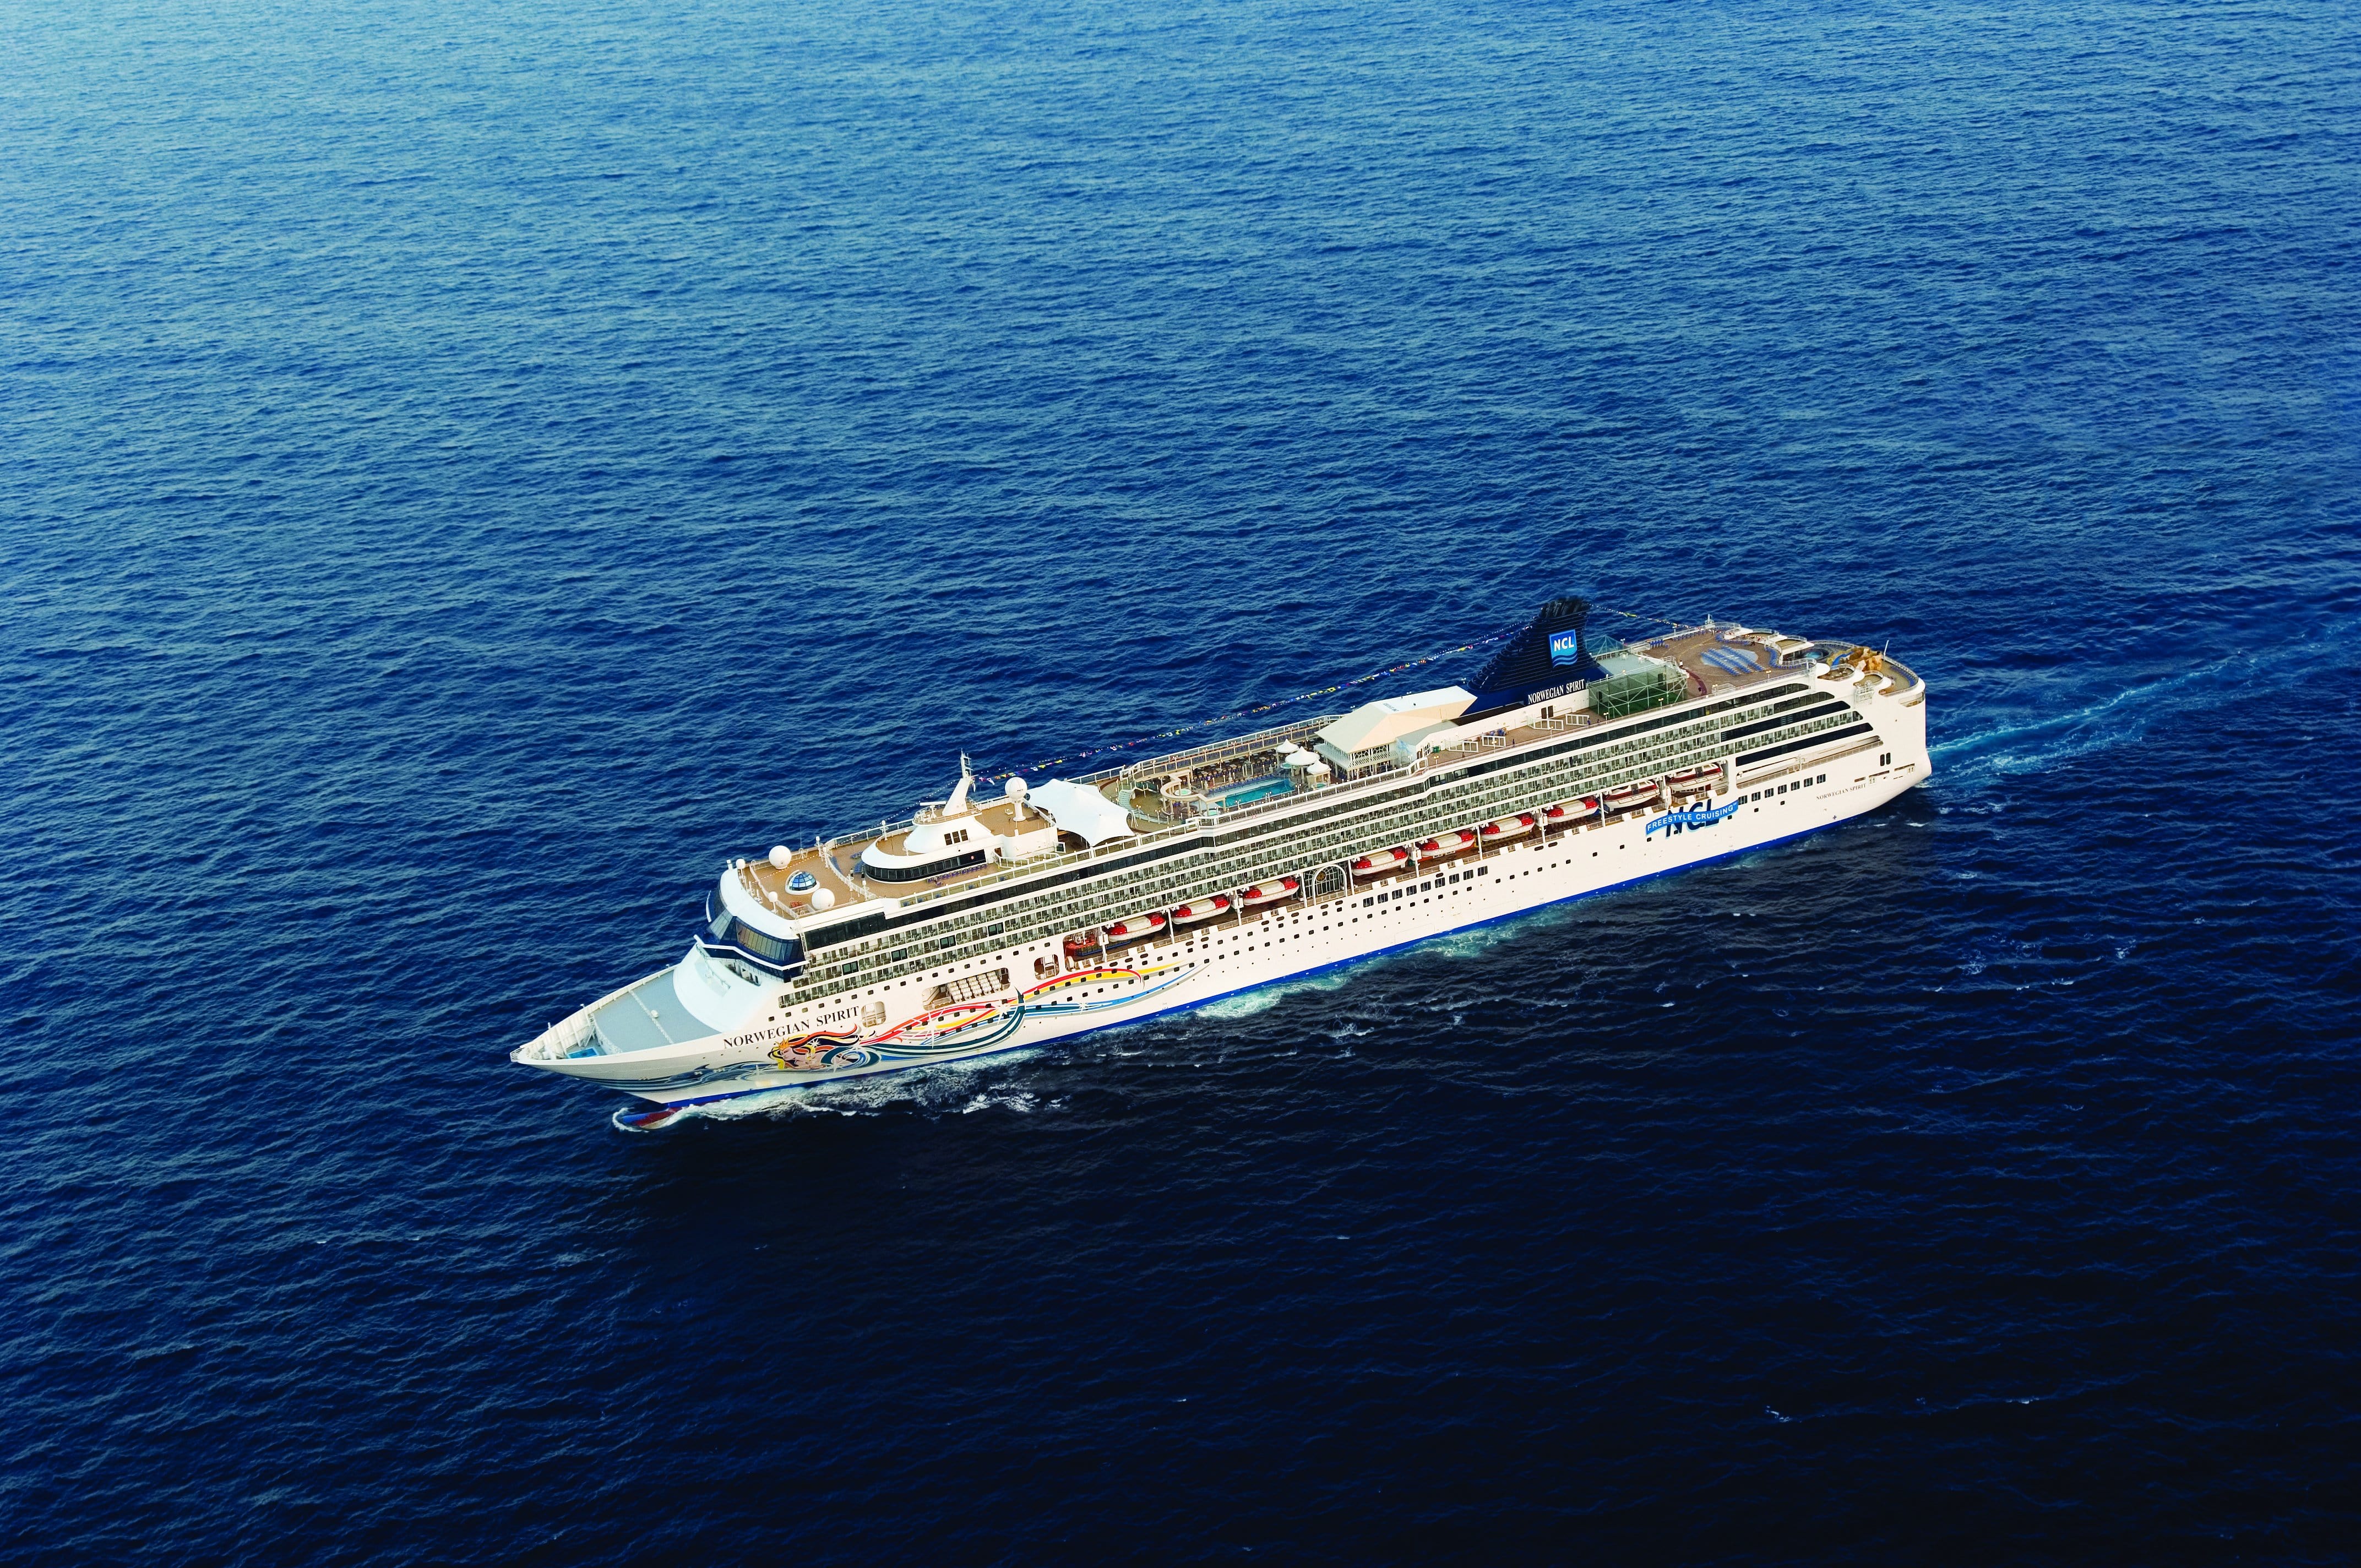 cruises to go on without a passport